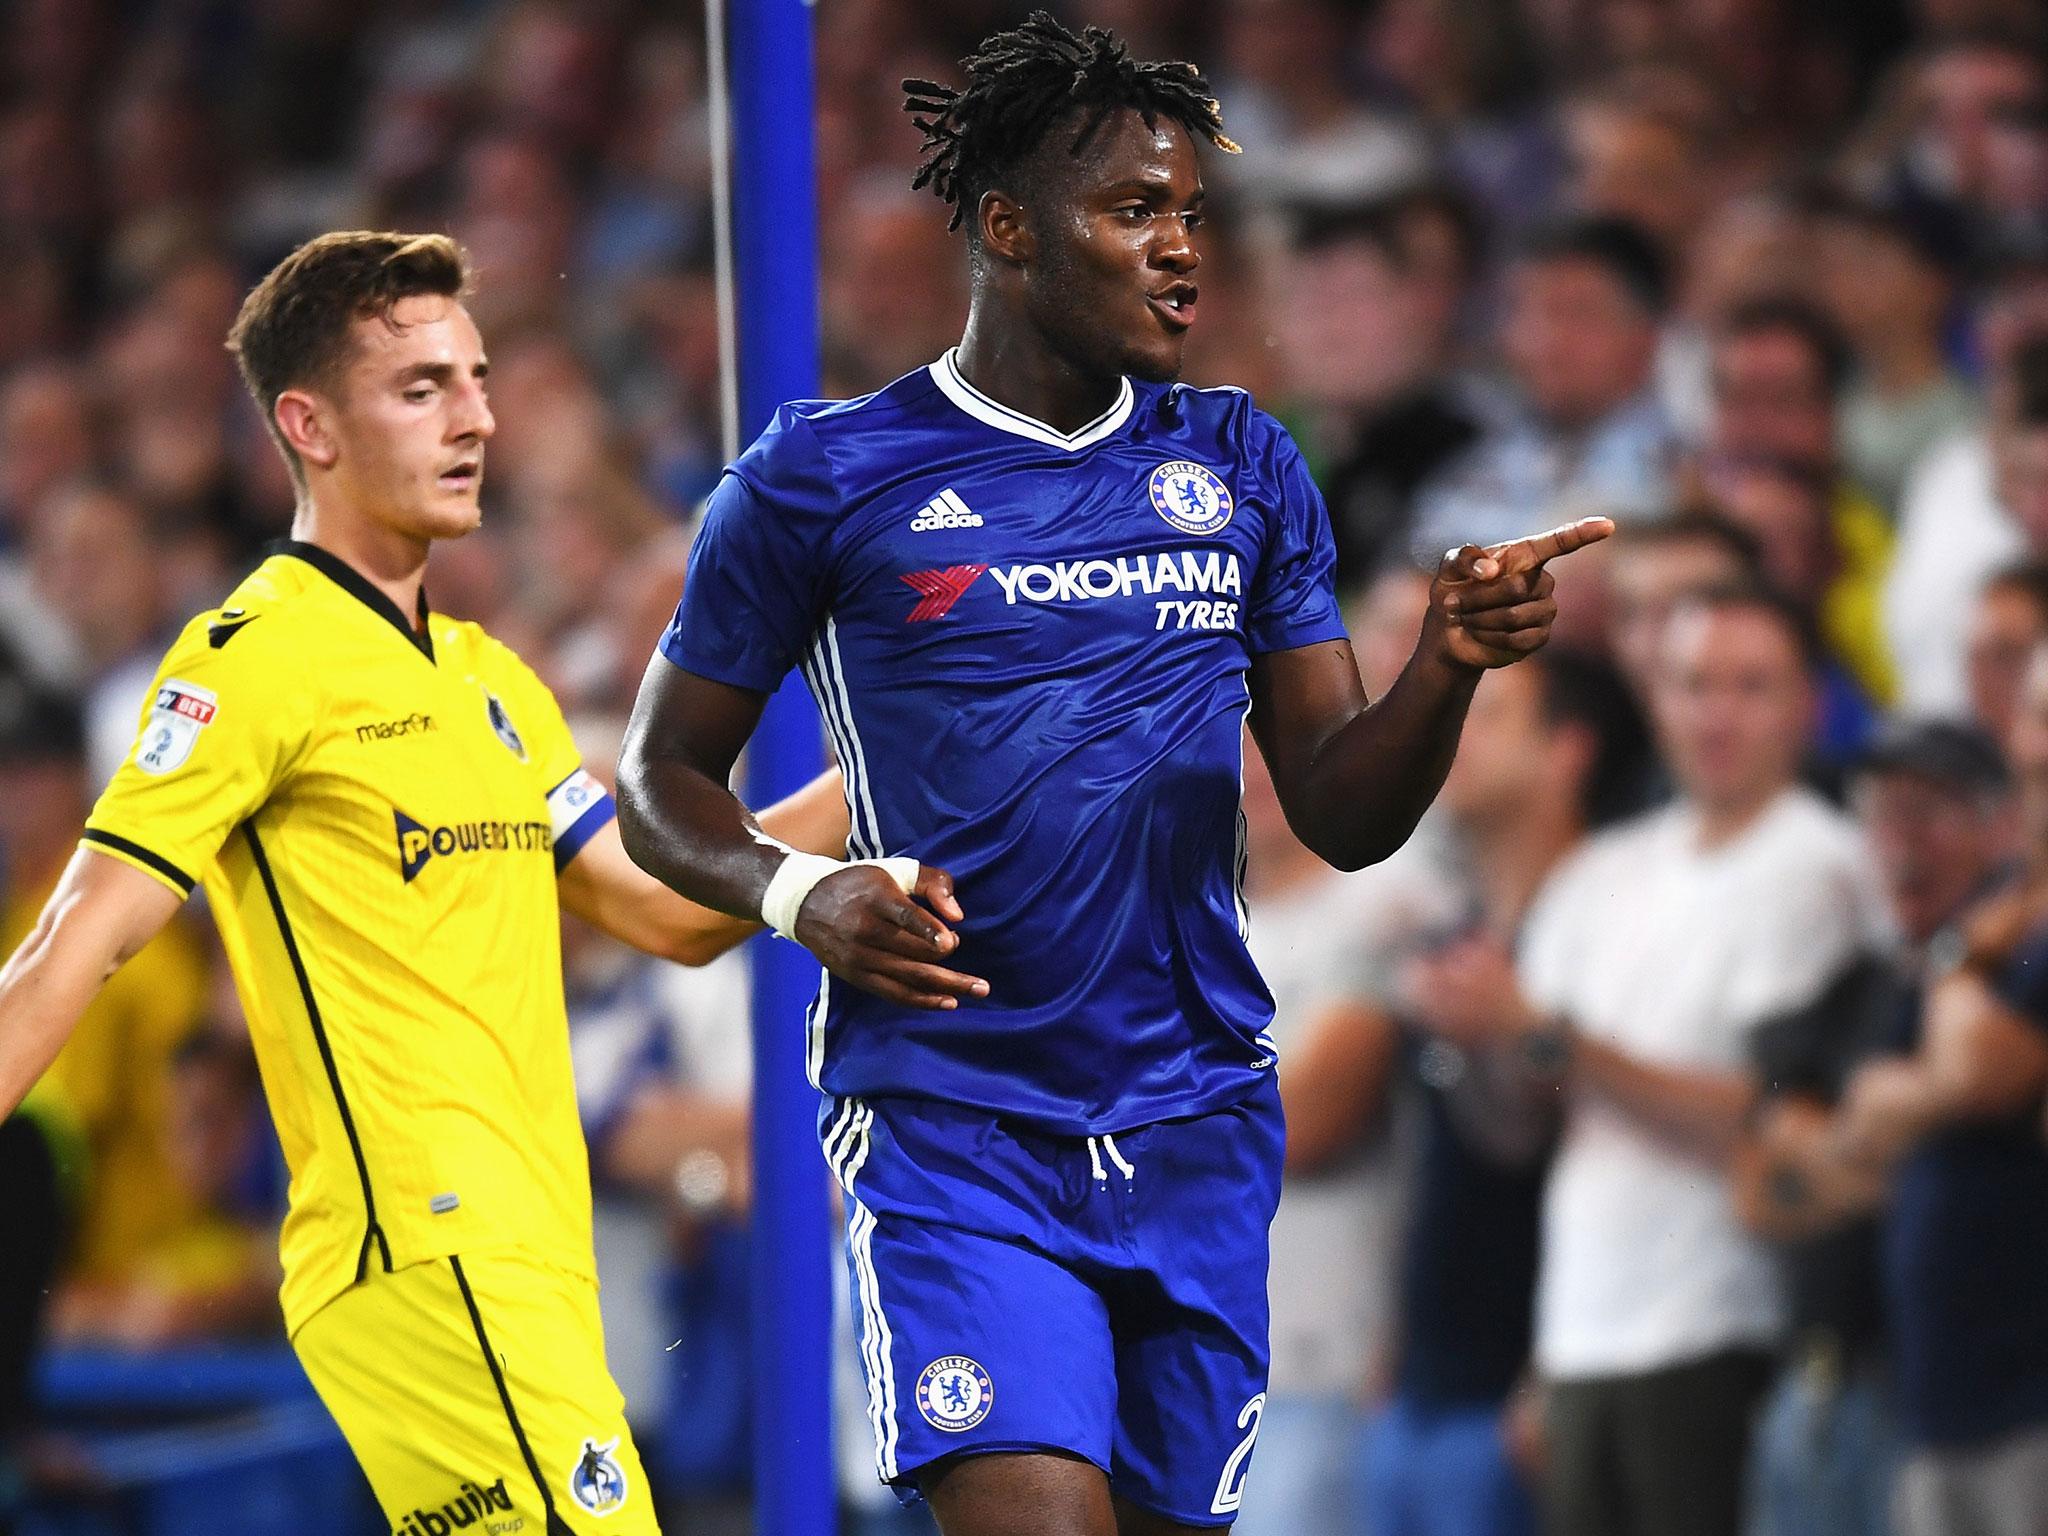 Michy Batshuayi has been told to stick close to Diego Costa and learn from his Chelsea teammate by Antonio Conte